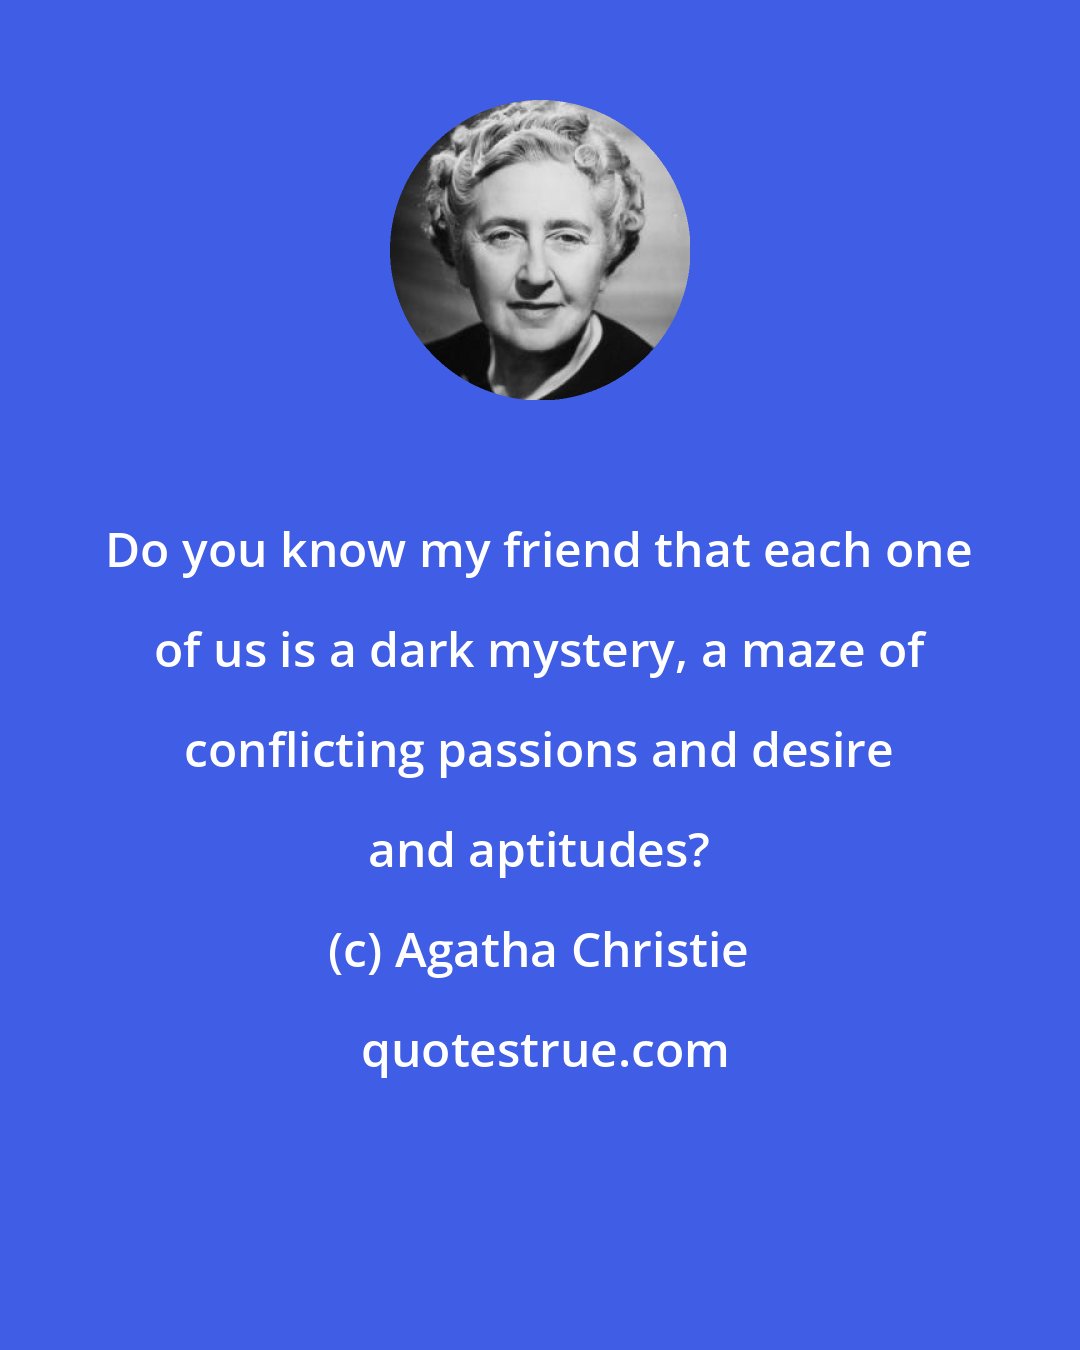 Agatha Christie: Do you know my friend that each one of us is a dark mystery, a maze of conflicting passions and desire and aptitudes?